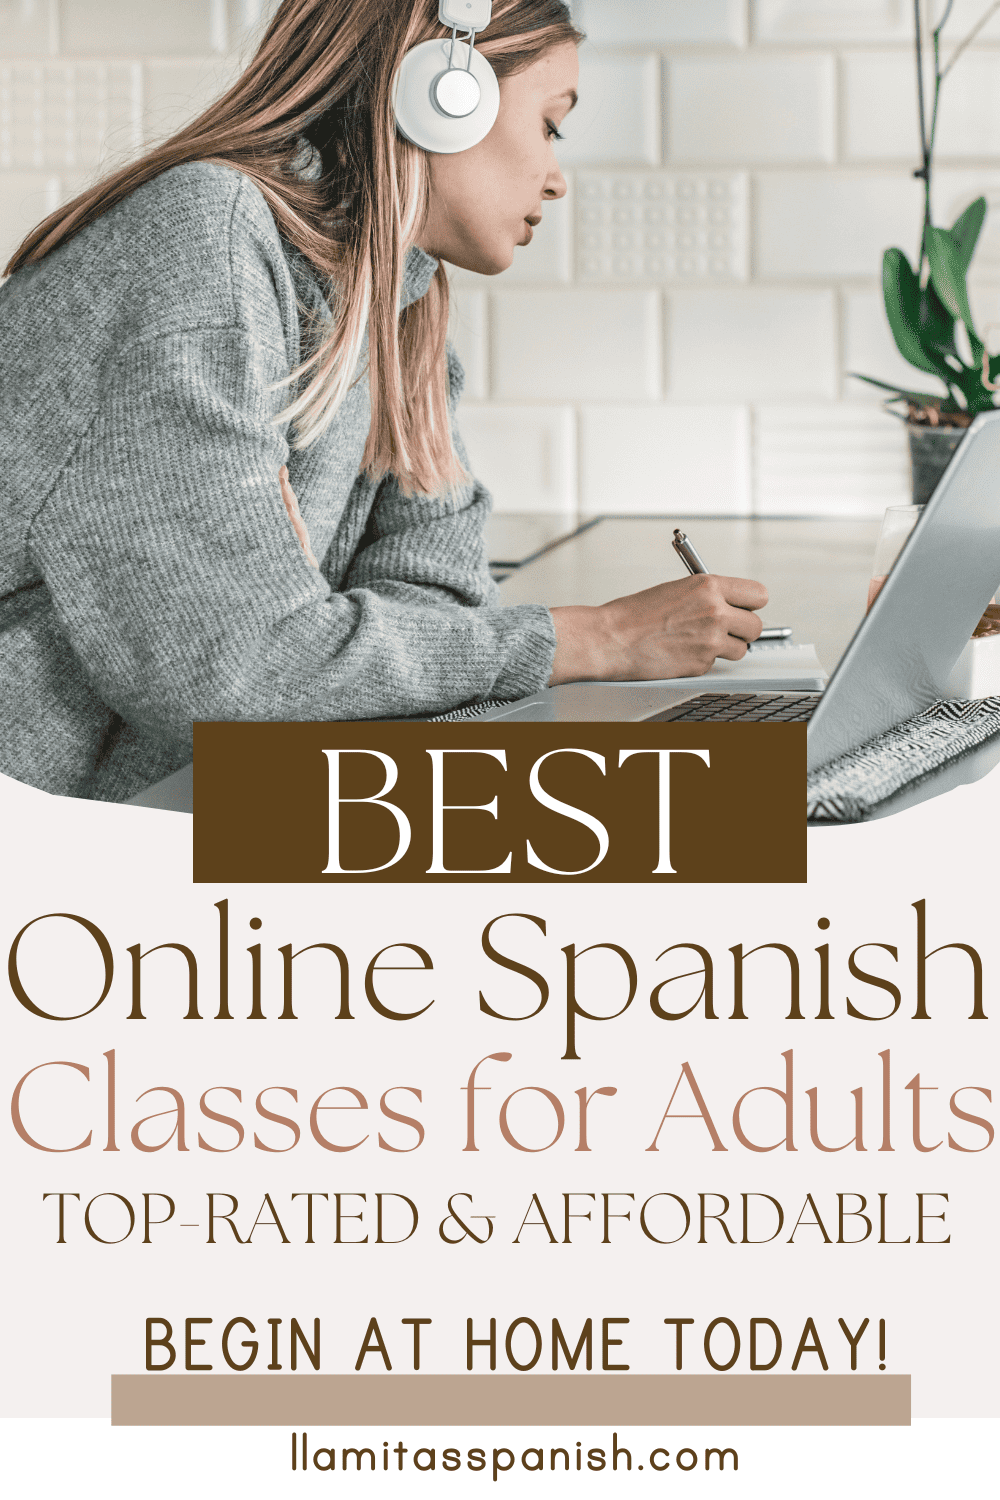 woman wearing headphones and learning Spanish on computer